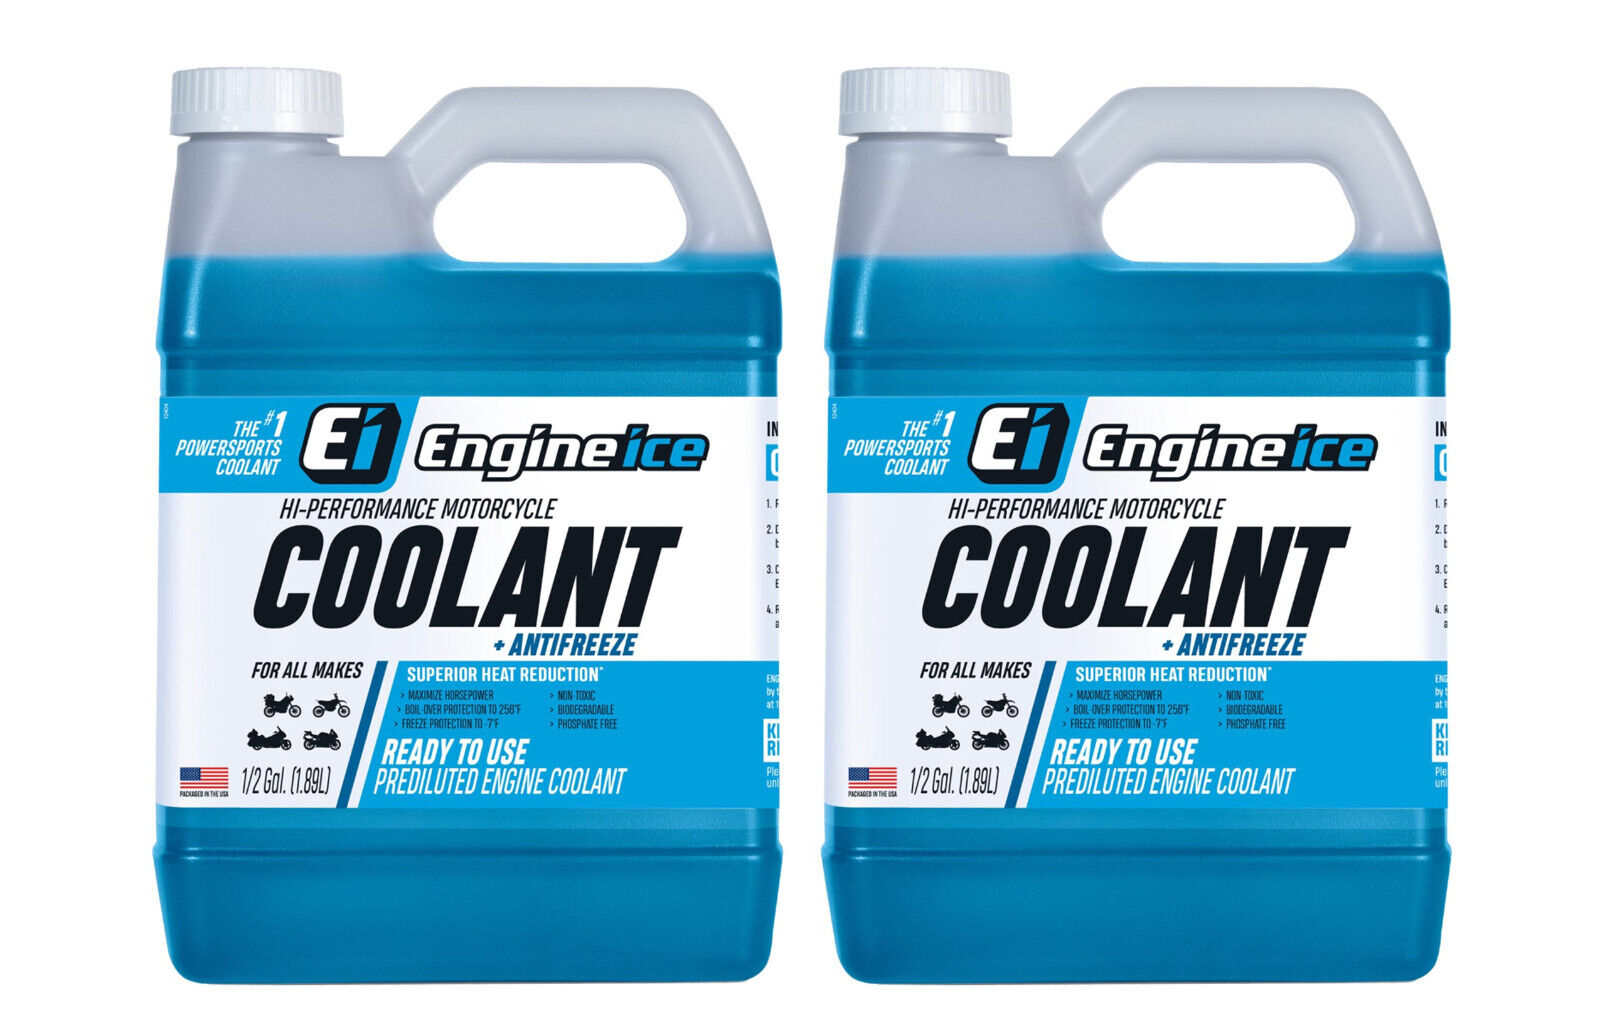 Qty 2 of ENGINE ICE 1/2 GAL High Performance Coolant Non-Toxic Biodegradable